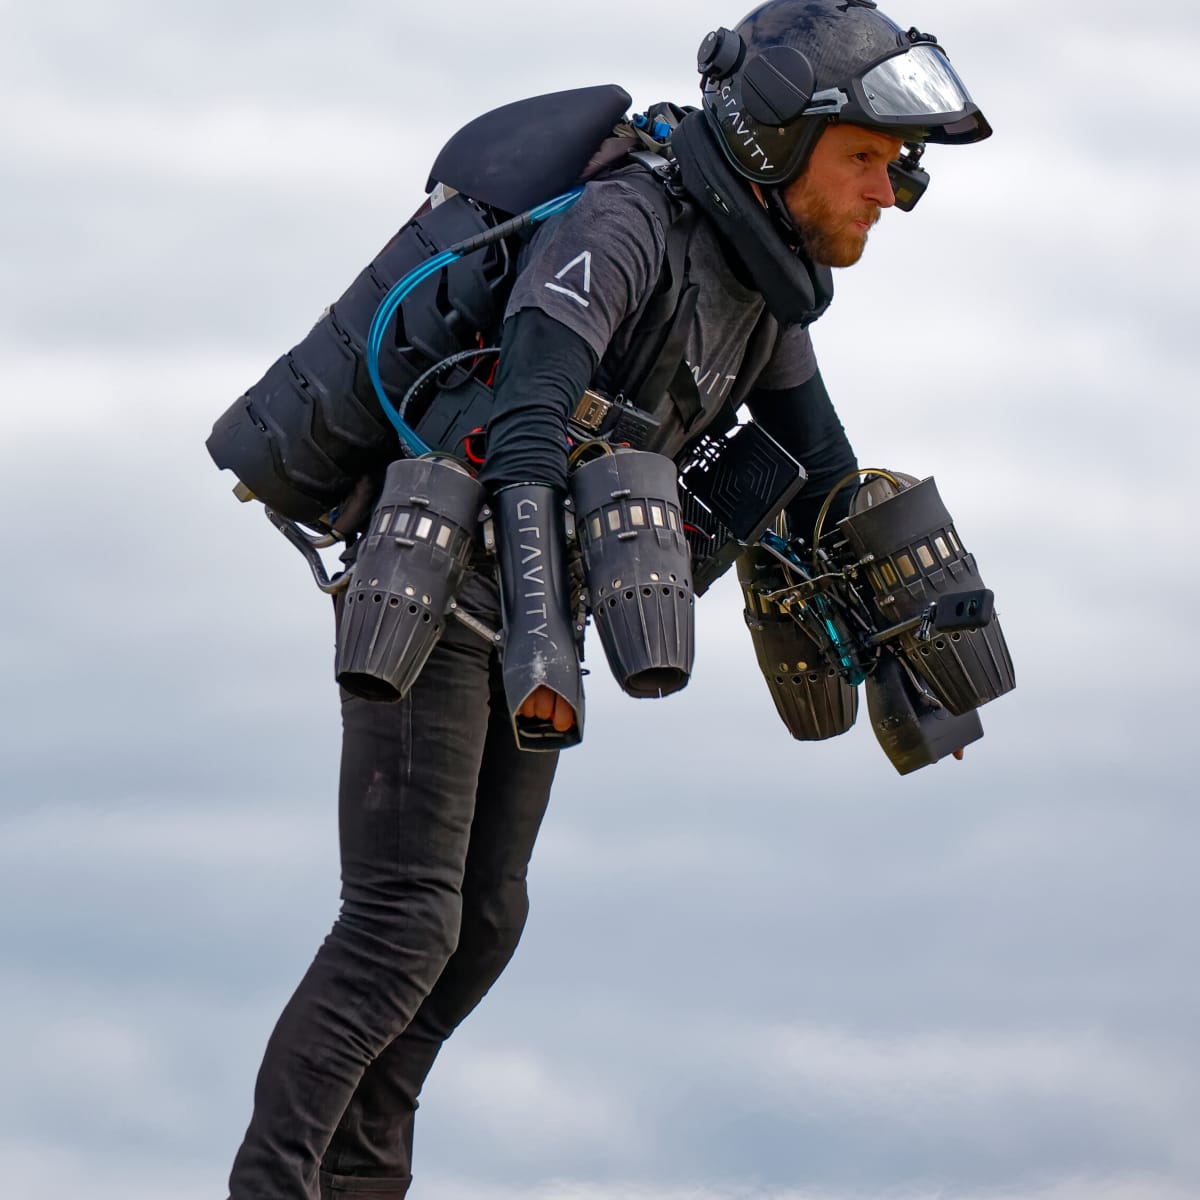 Amateurs are flying real-life jetpacks now, nbd - Video - CNET